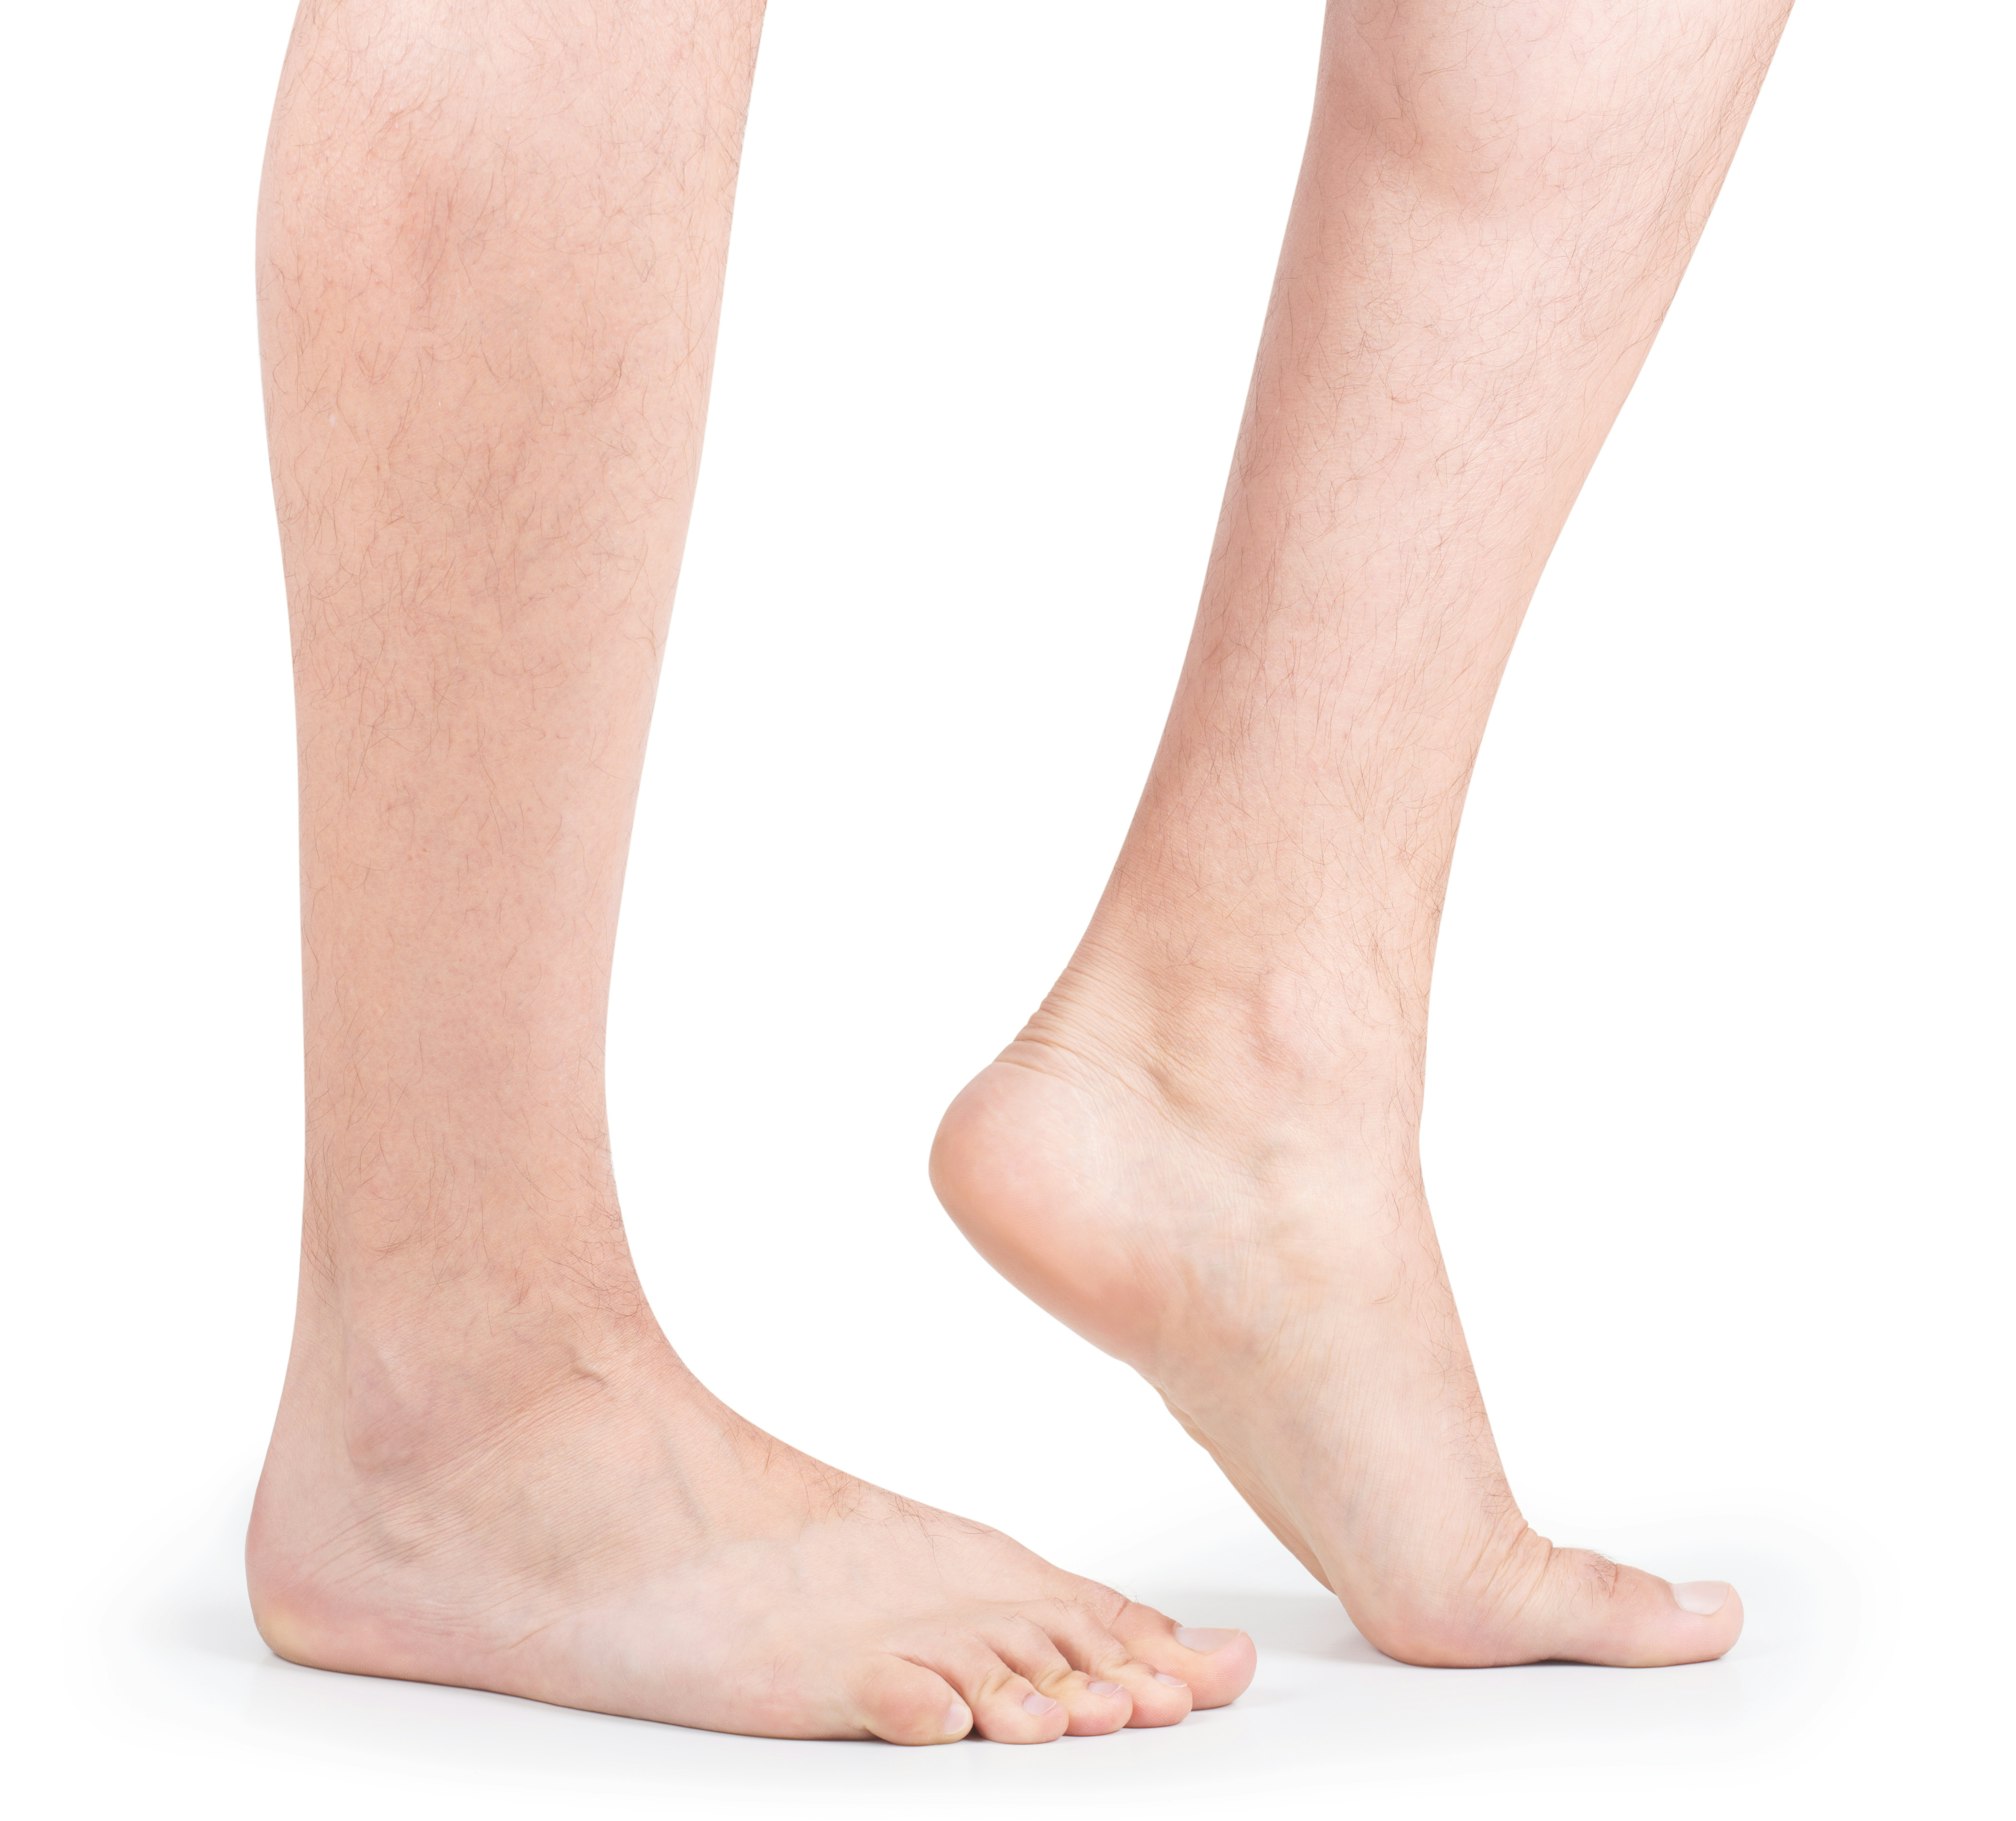 Cankles, Begone! 8 Tips and Exercises to Help You Lose Fat Ankles